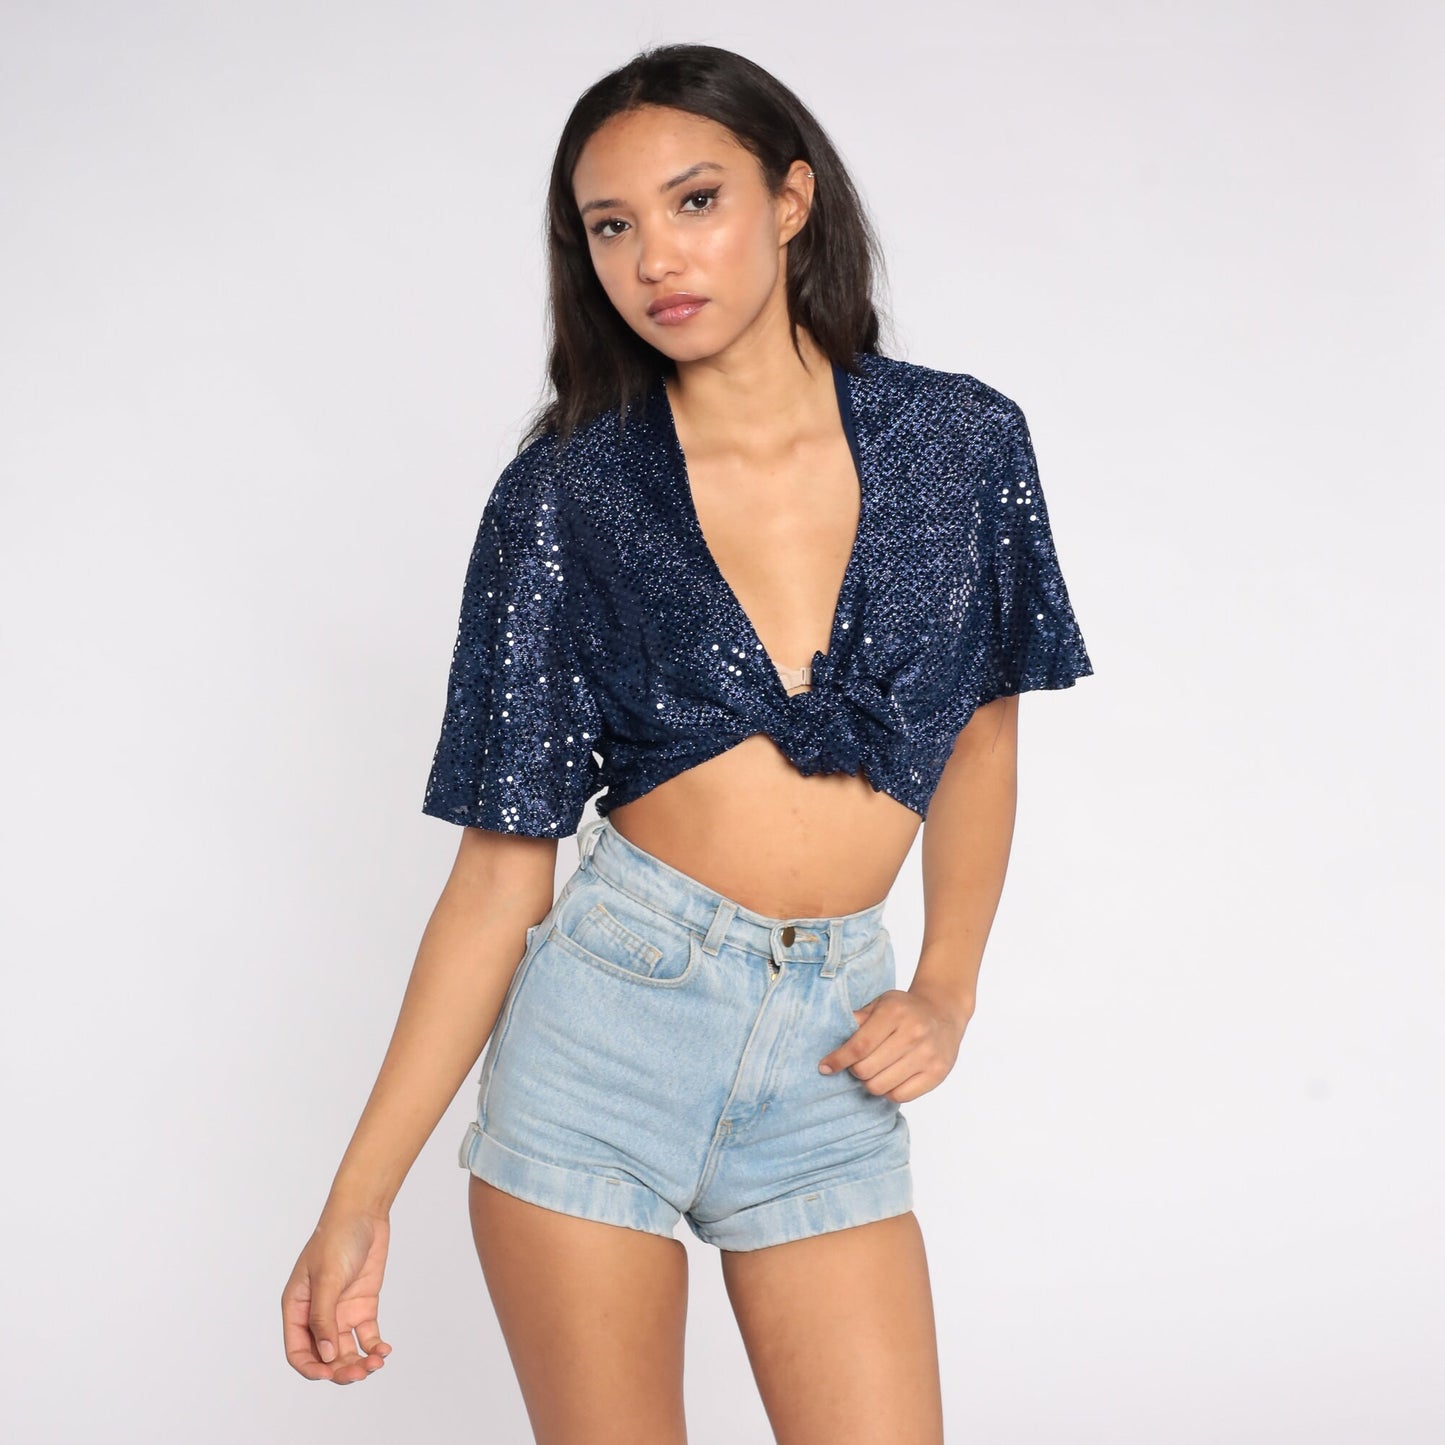 Sequin Crop Top 90s Party Shirt Blue Sparkly Tie Front Blouse Vintage Formal Going Out Festival Glam Holiday Short Sleeve Retro 1990s Large